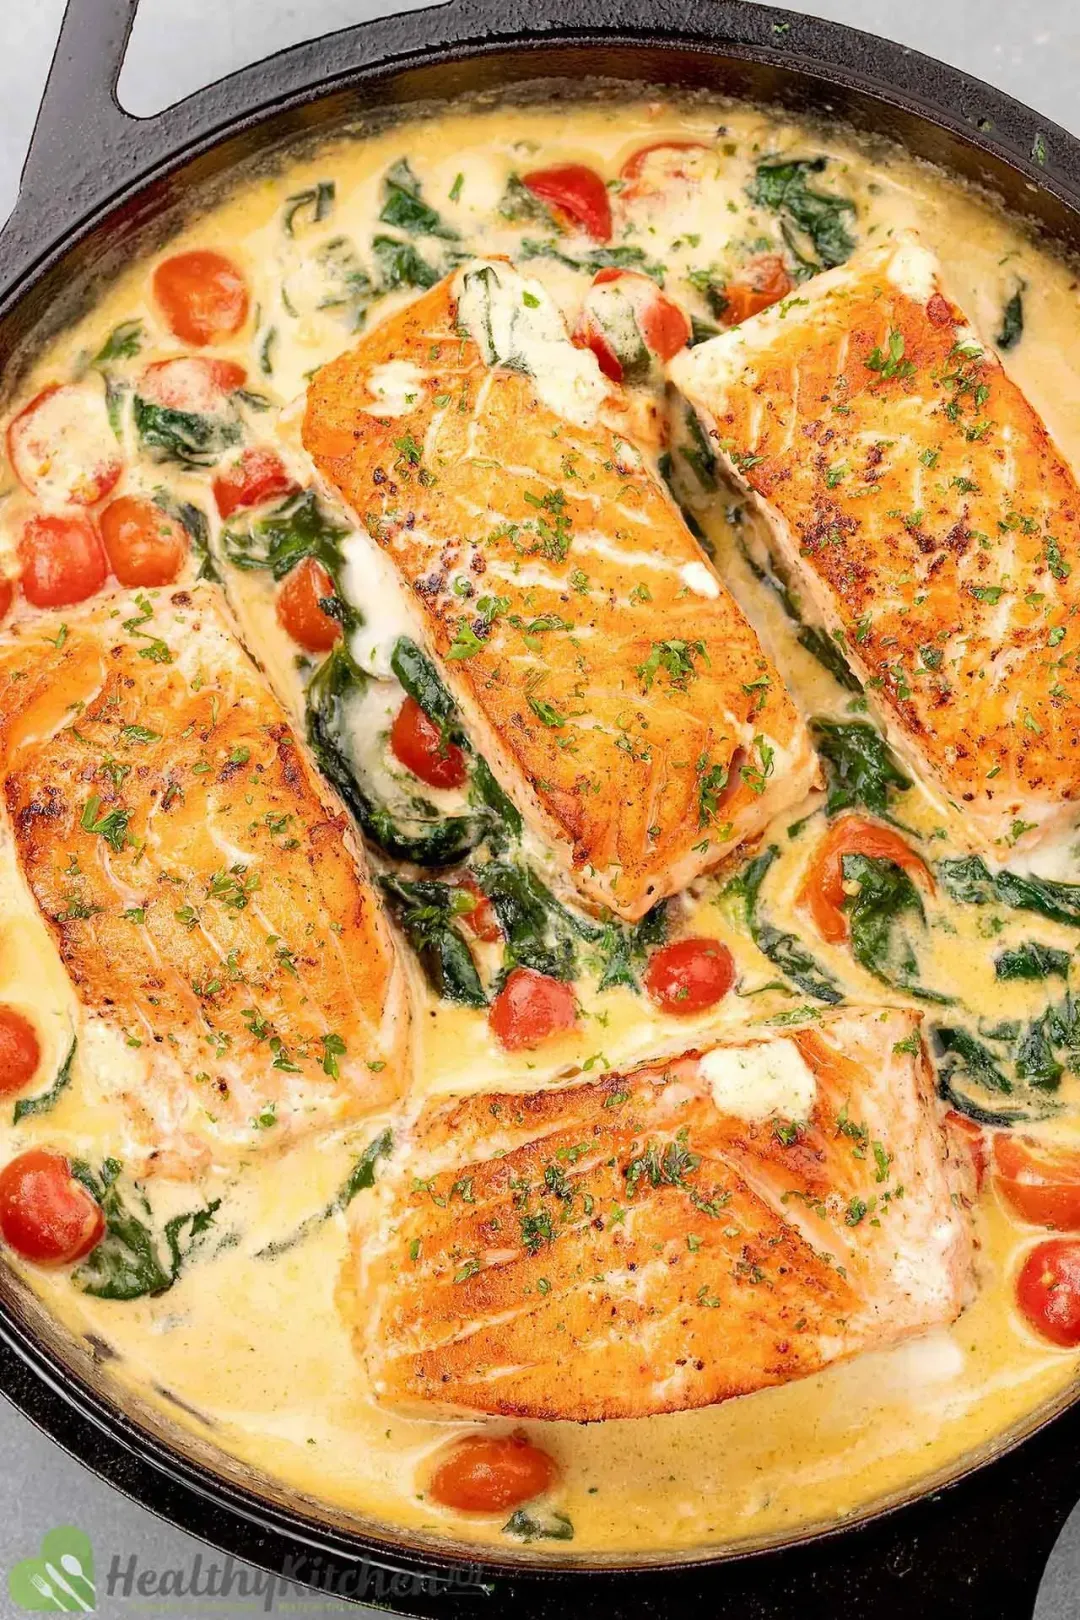 Four golden salmon filets swimming in a cream sauce cooked with cherry tomatoes and spinach